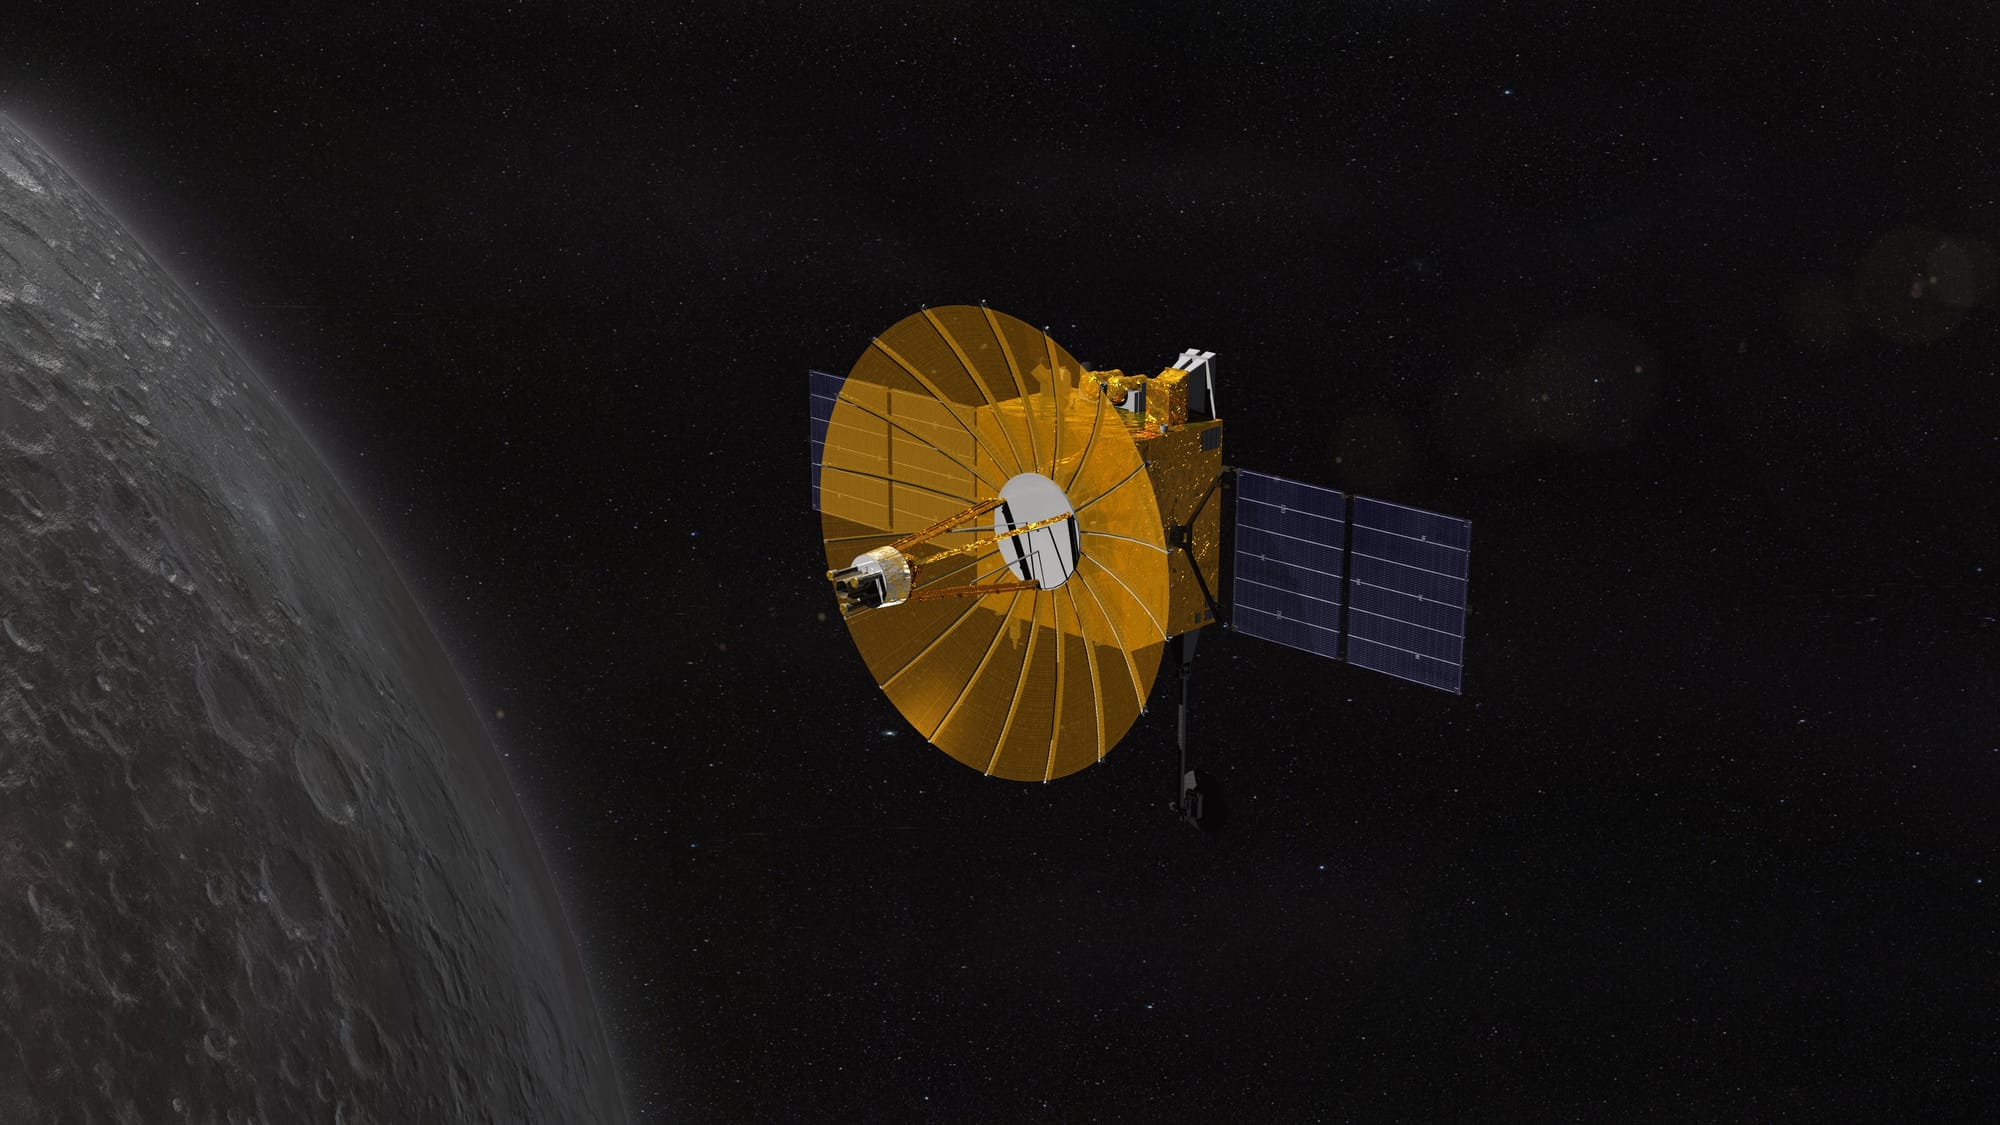 A render of the Queqiao-2 satellite near the Moon.